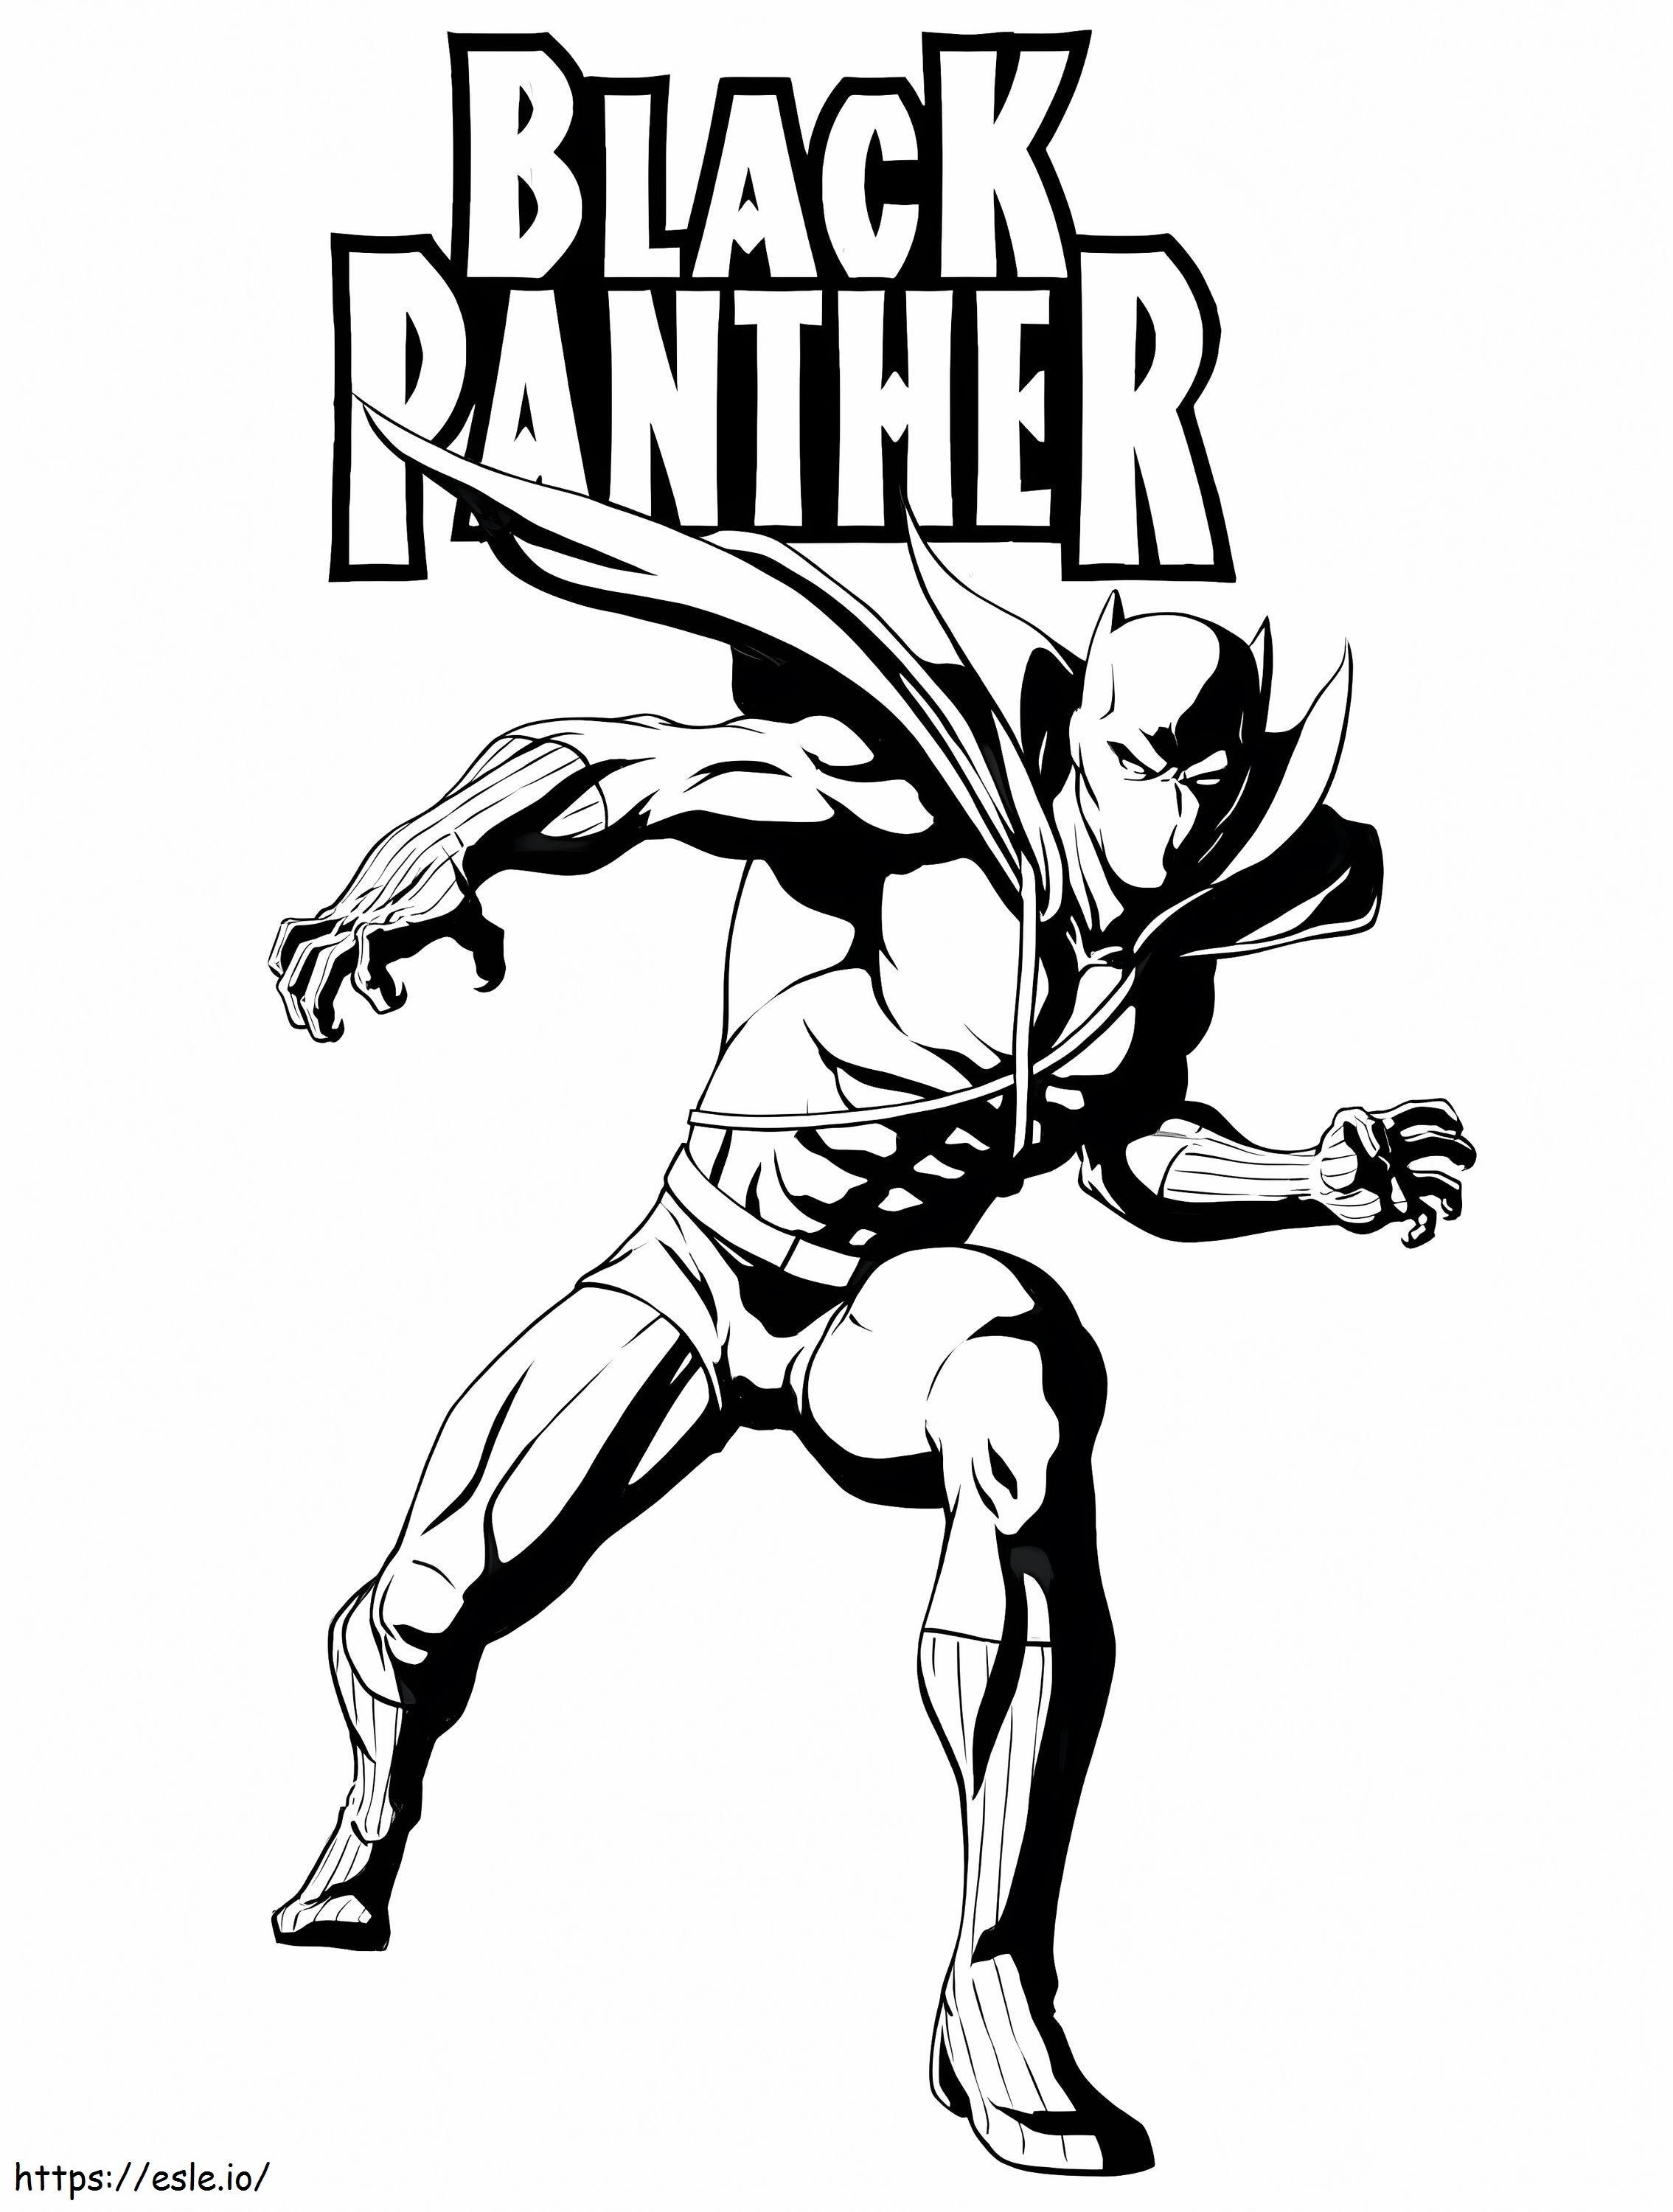 Black Panther 1 coloring page